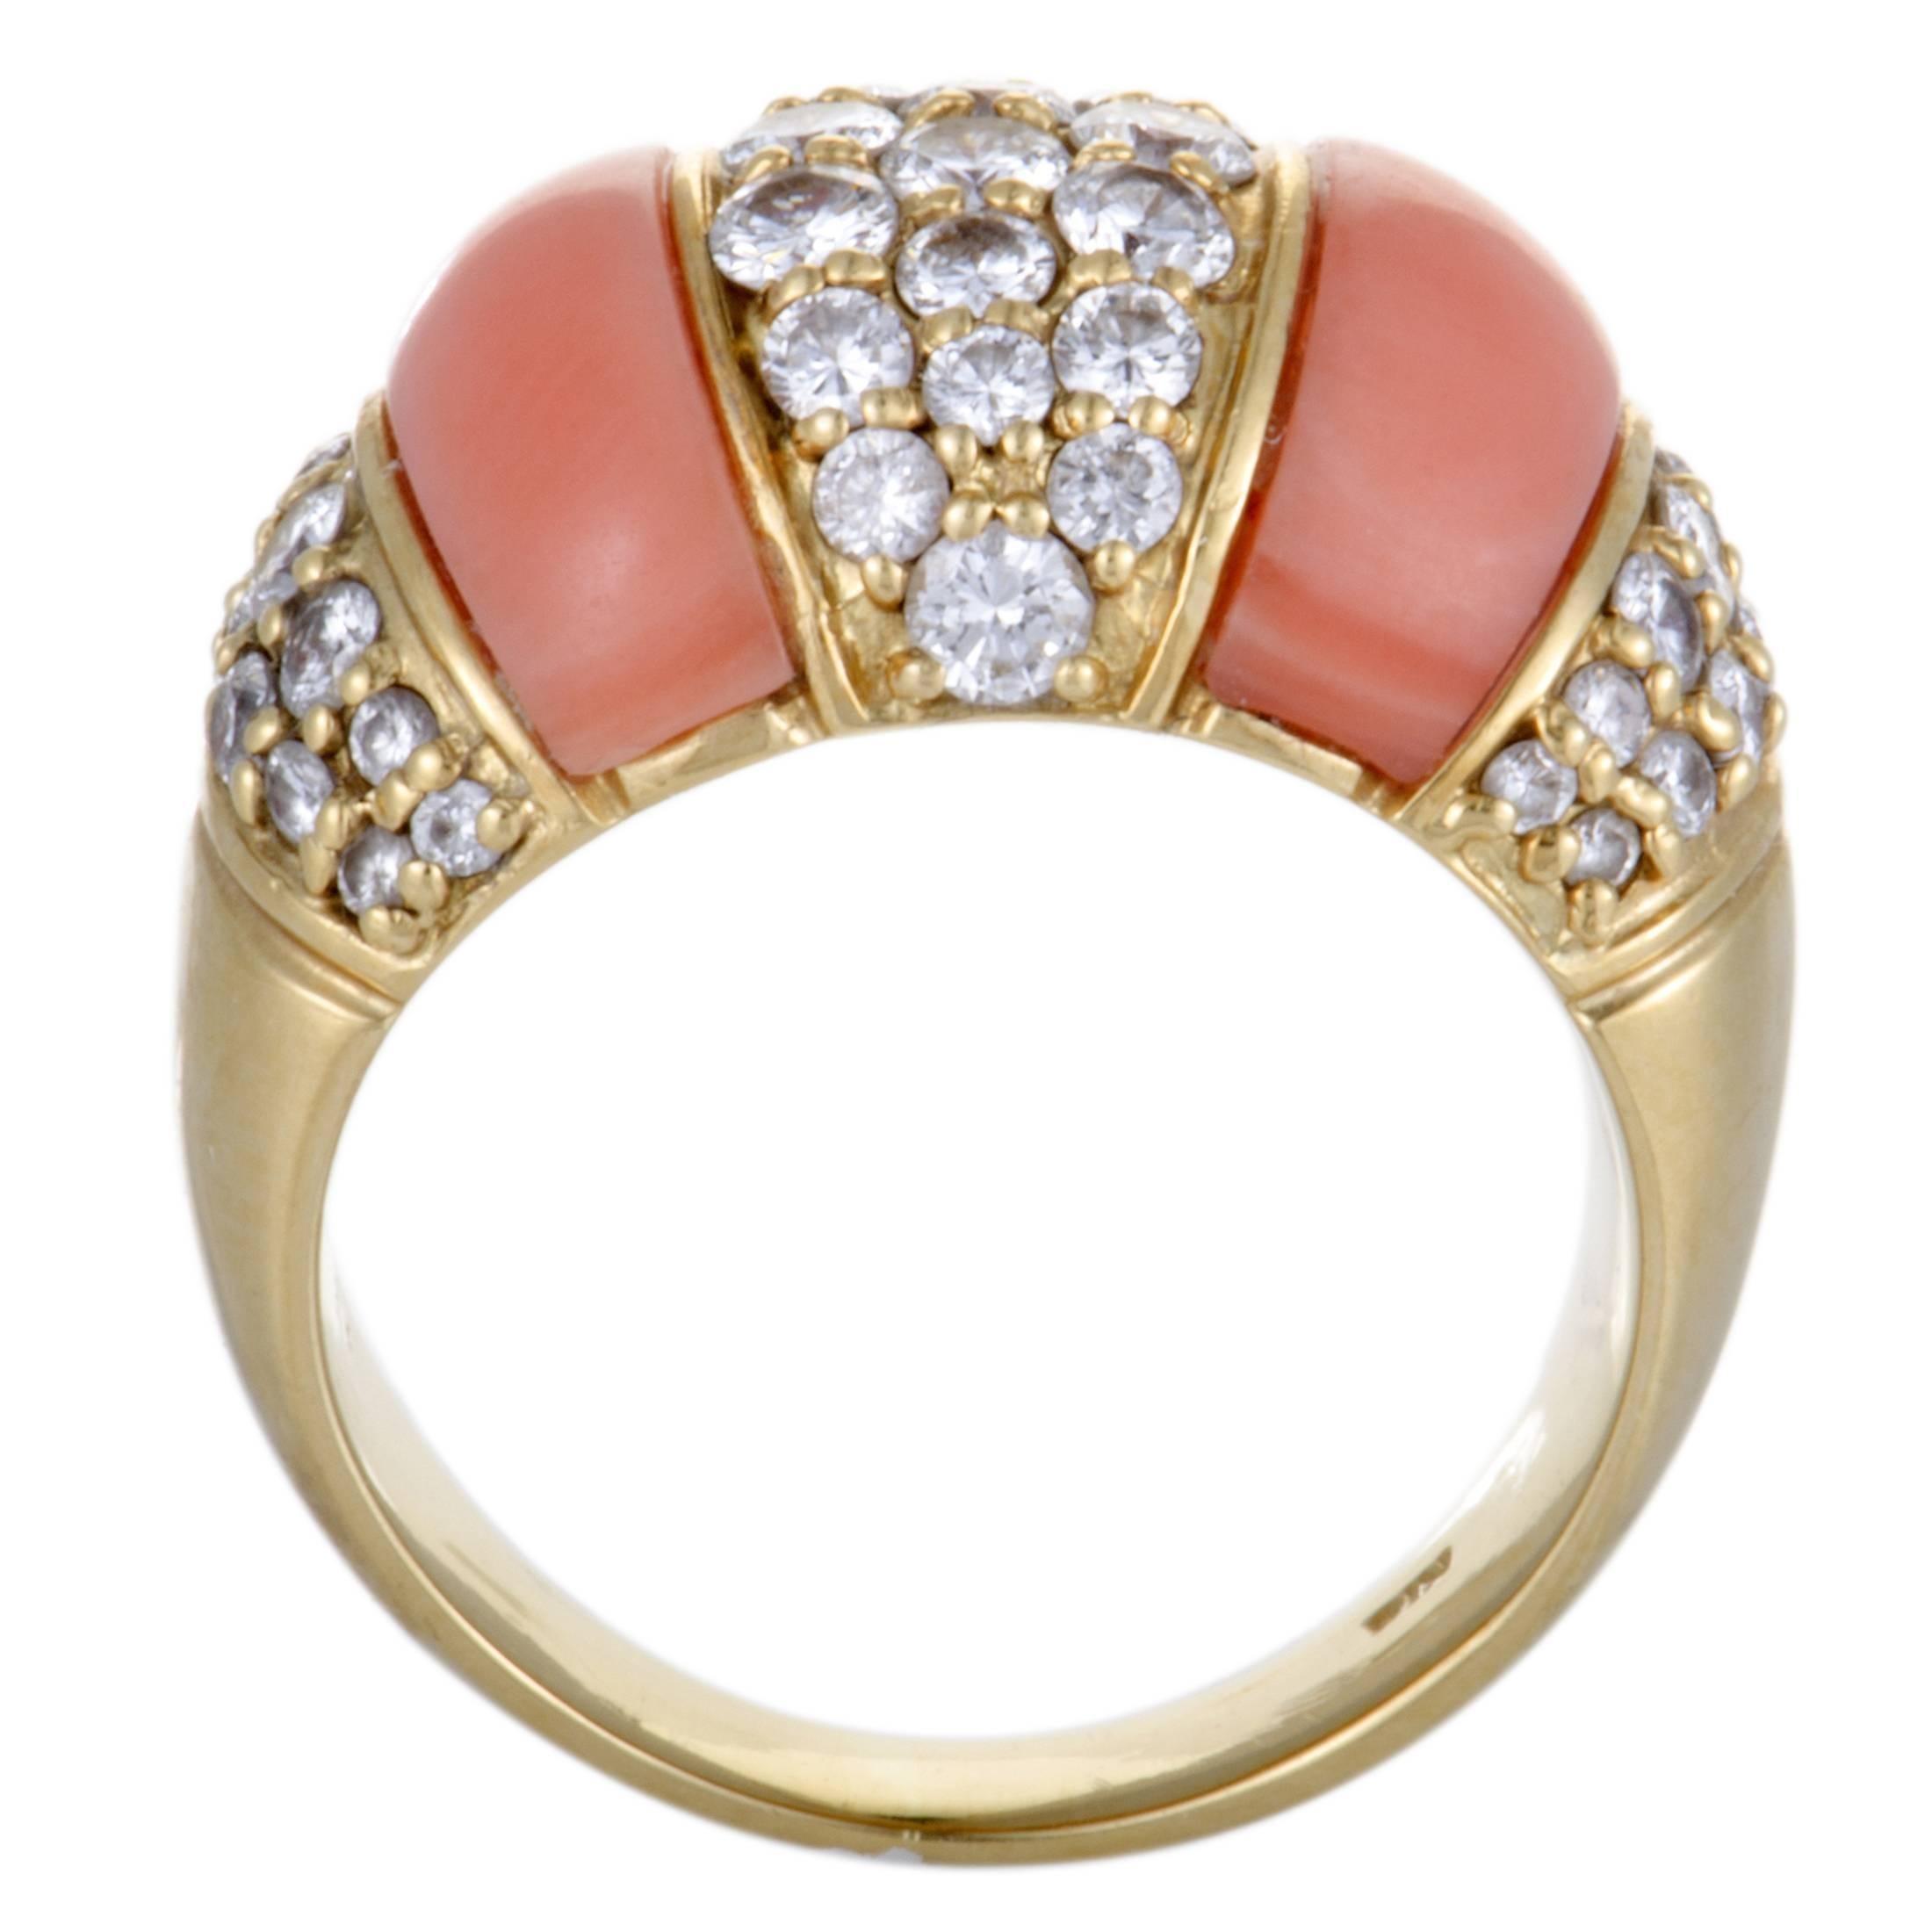 The gorgeous shimmer of 18K yellow gold produces a sensationally luxurious effect in this remarkable ring. Beautifully embellished in 1.41ct of sparkling diamonds and elegant coral, this stunning ring embodies a nifty feel of prestigious elegance